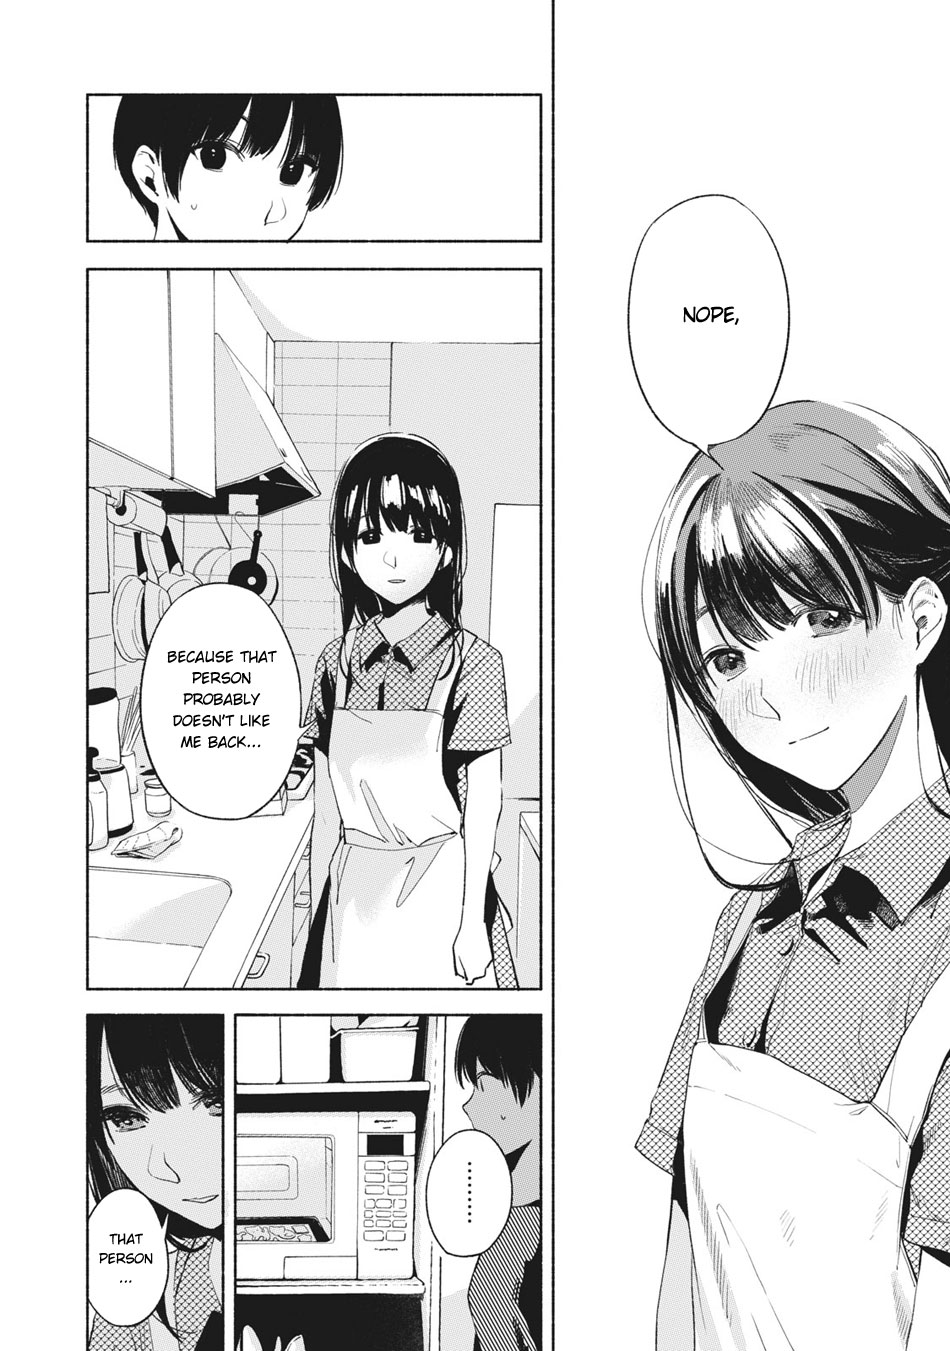 Musume no Tomodachi Vol. 3 Ch. 24 Perforated Cookie Batter